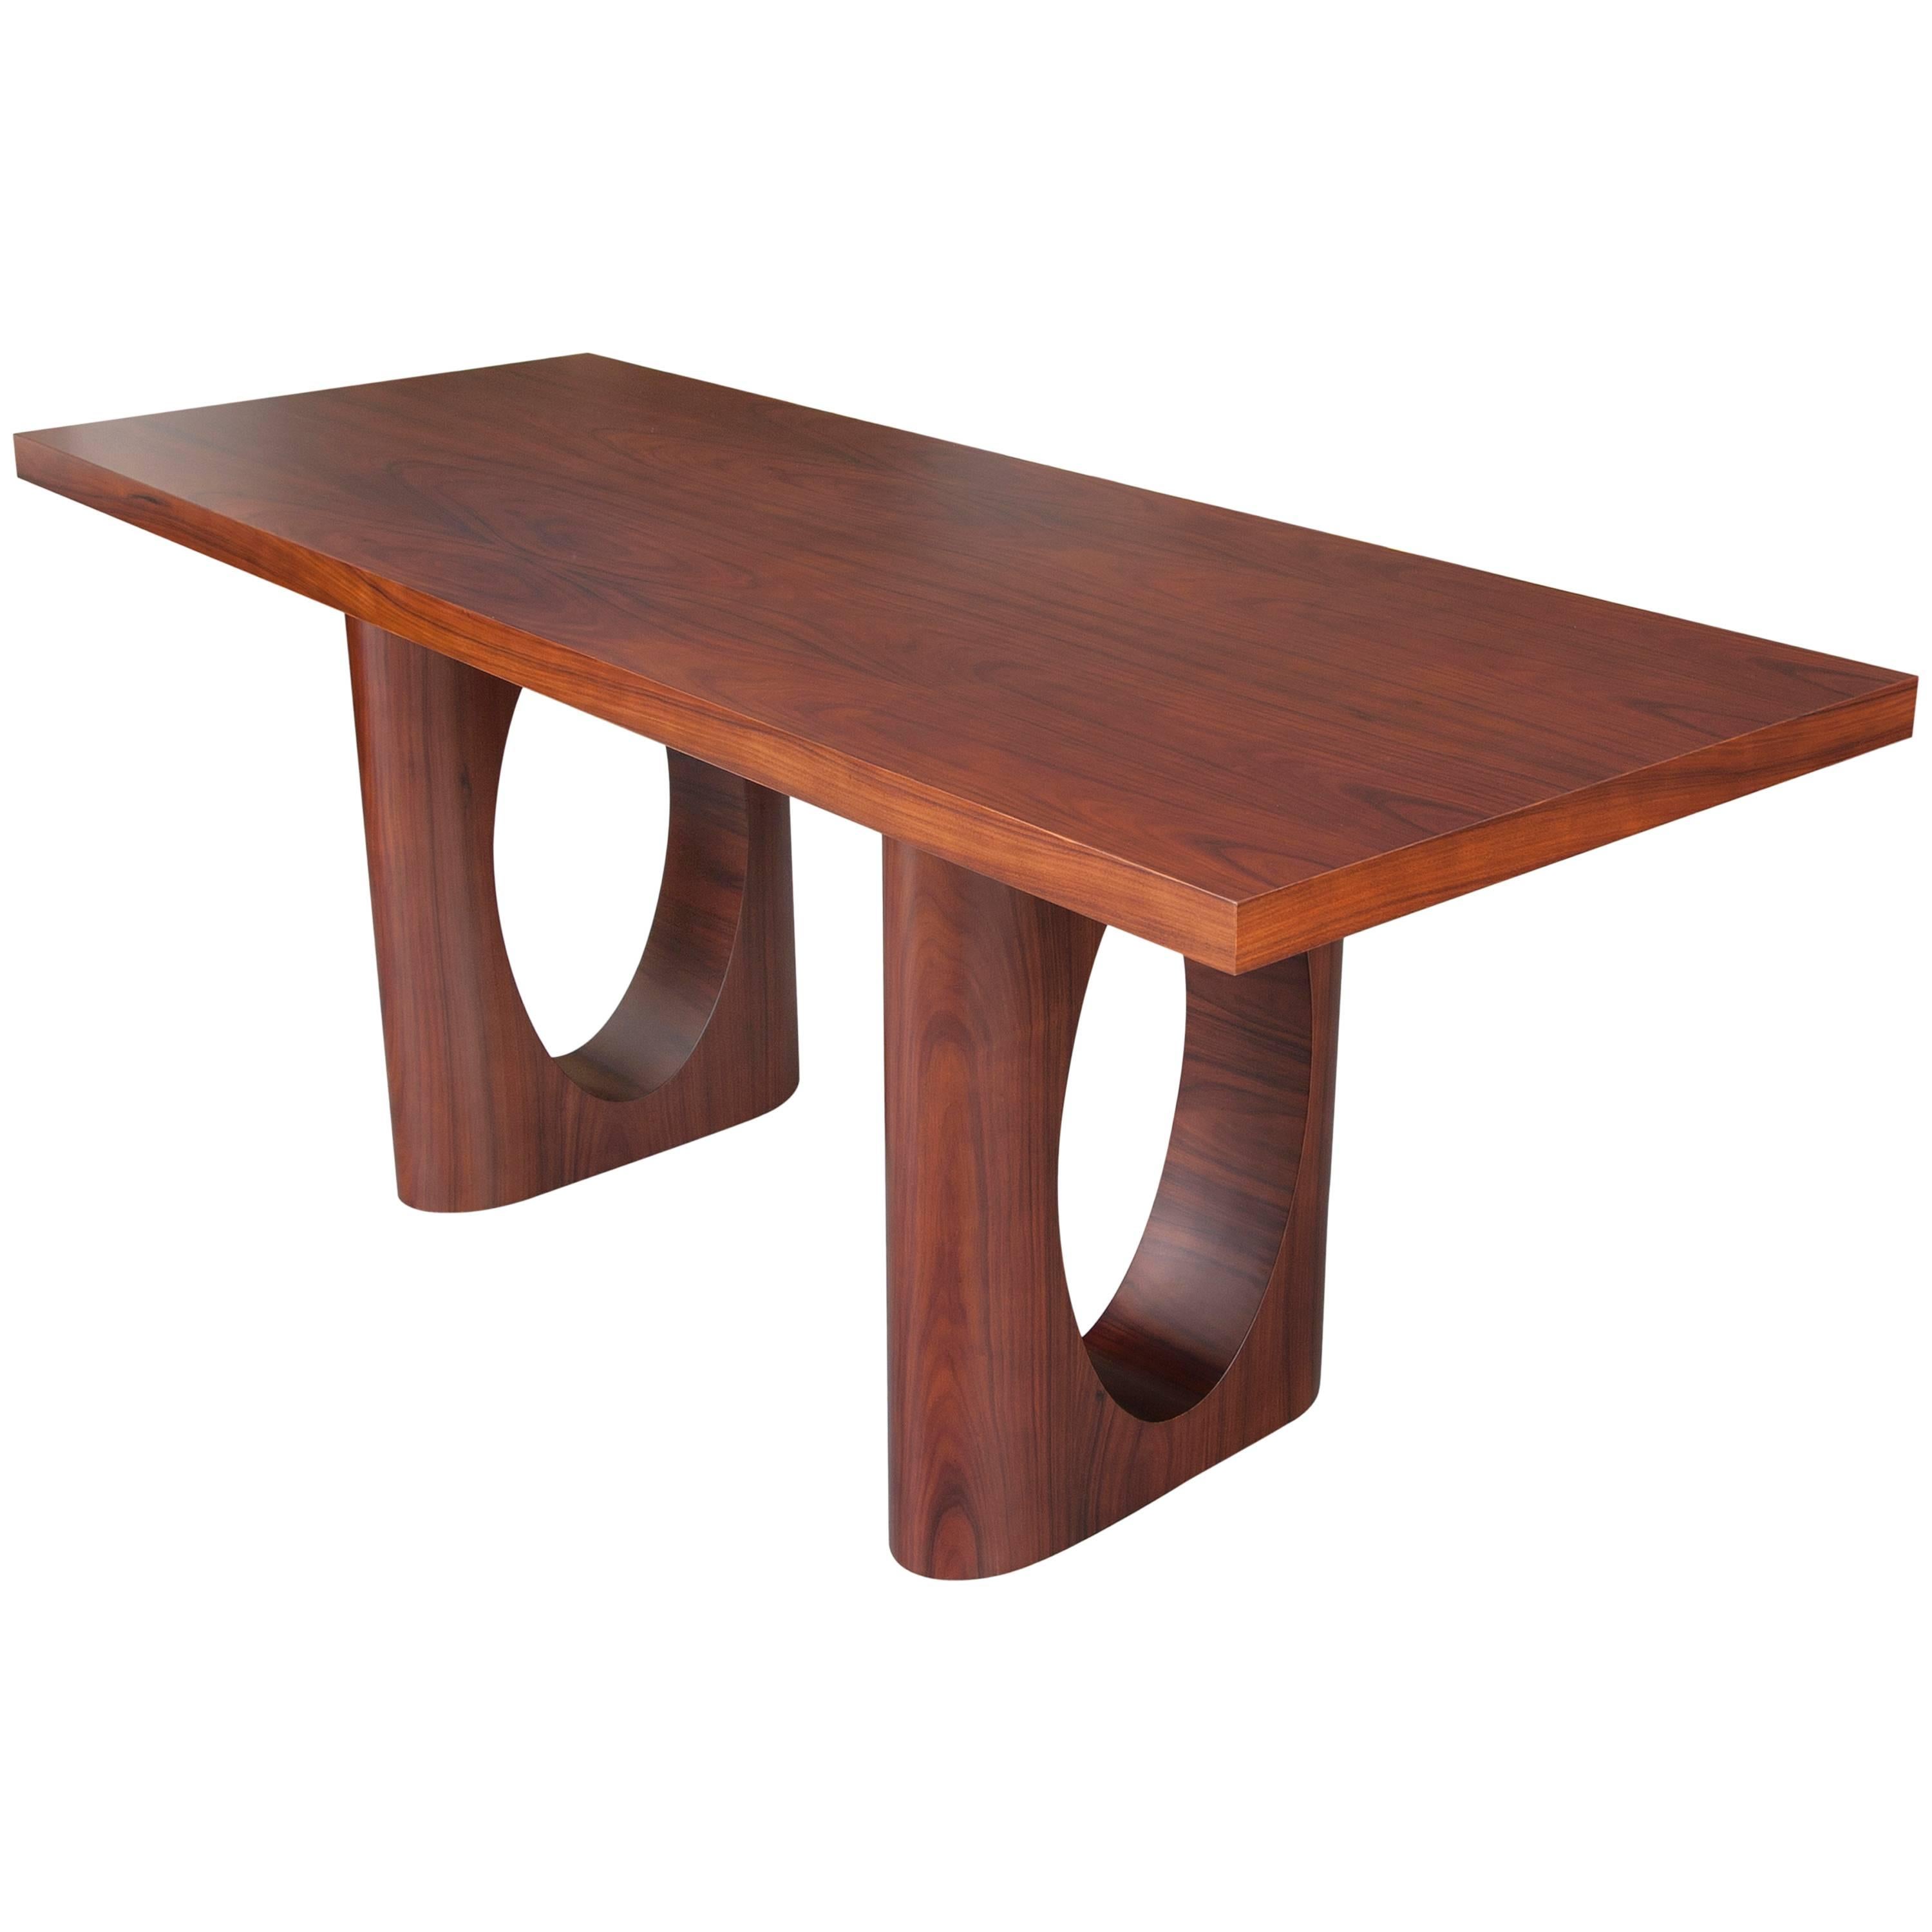 Large Walnut or Oak Wood or Lacquer Rectangular Modern Dining Table from France For Sale